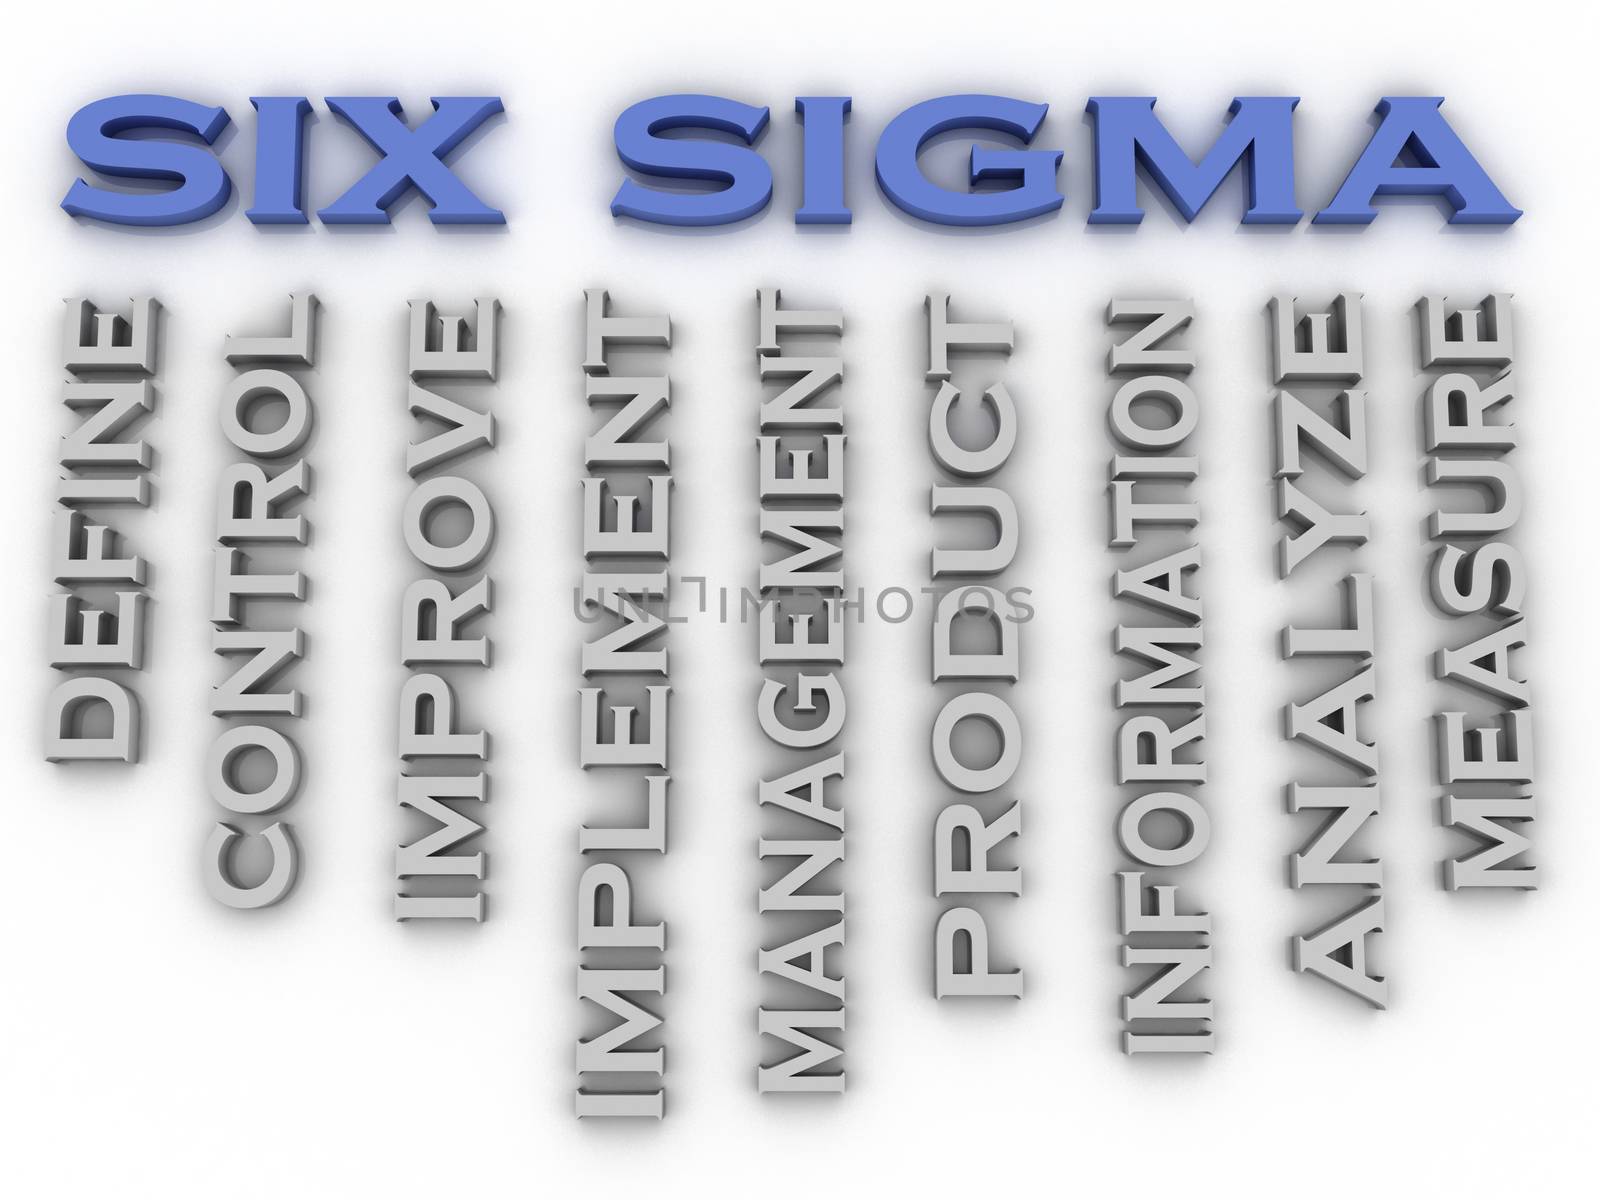 3d image Six sigma issues concept word cloud background